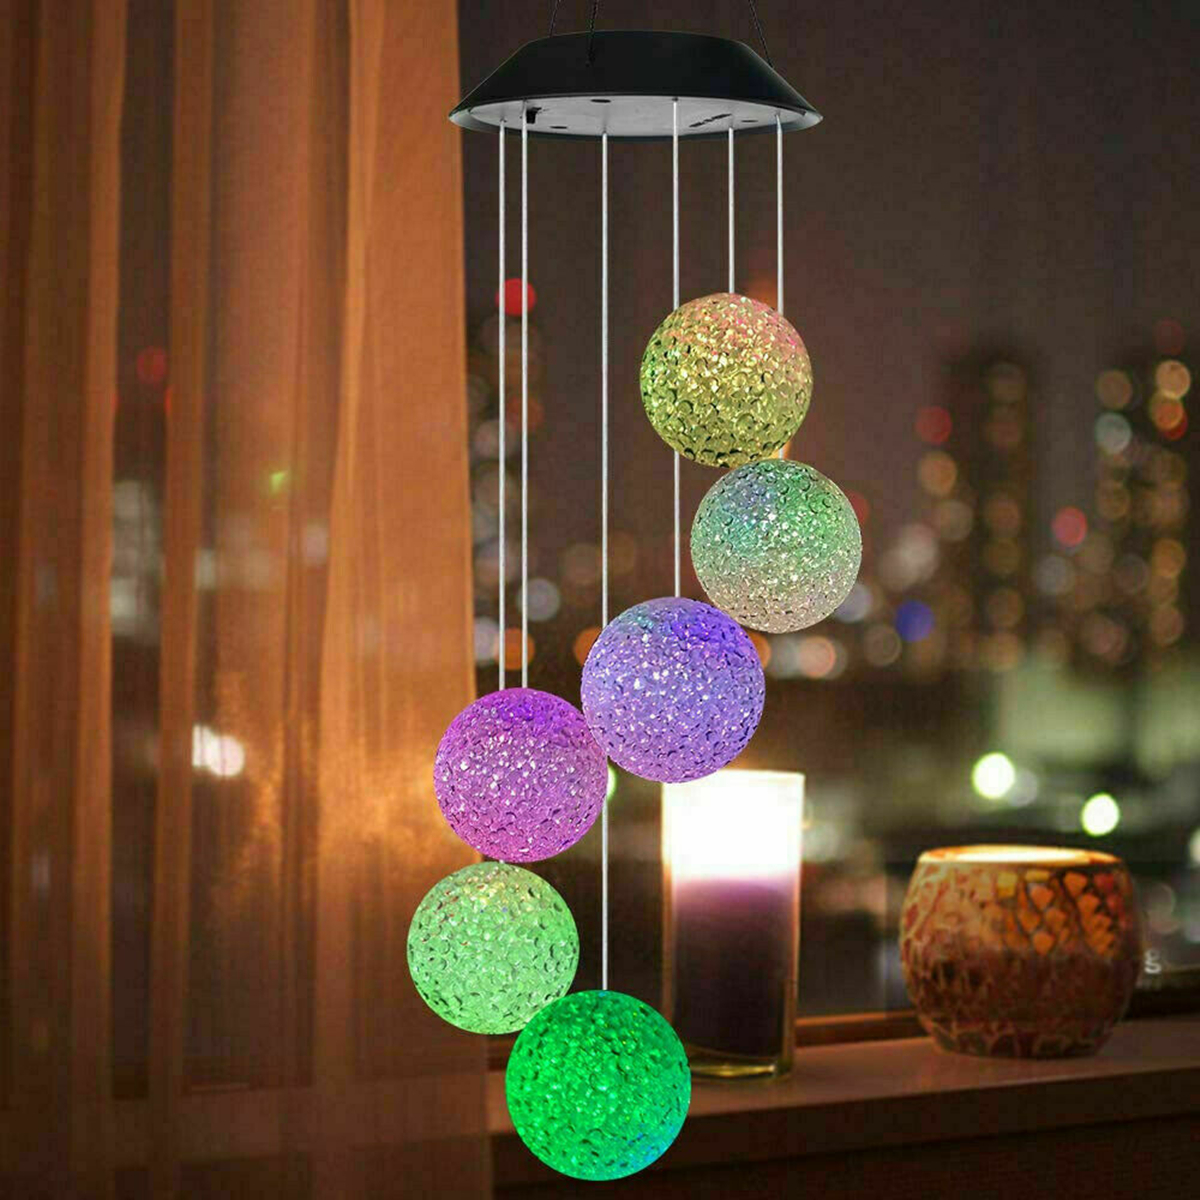 Aeolian-Hanging-Wind-Solar-LED-Lights-Chimes-Powered-String-Lawn-Garden-Lamp-1642749-7